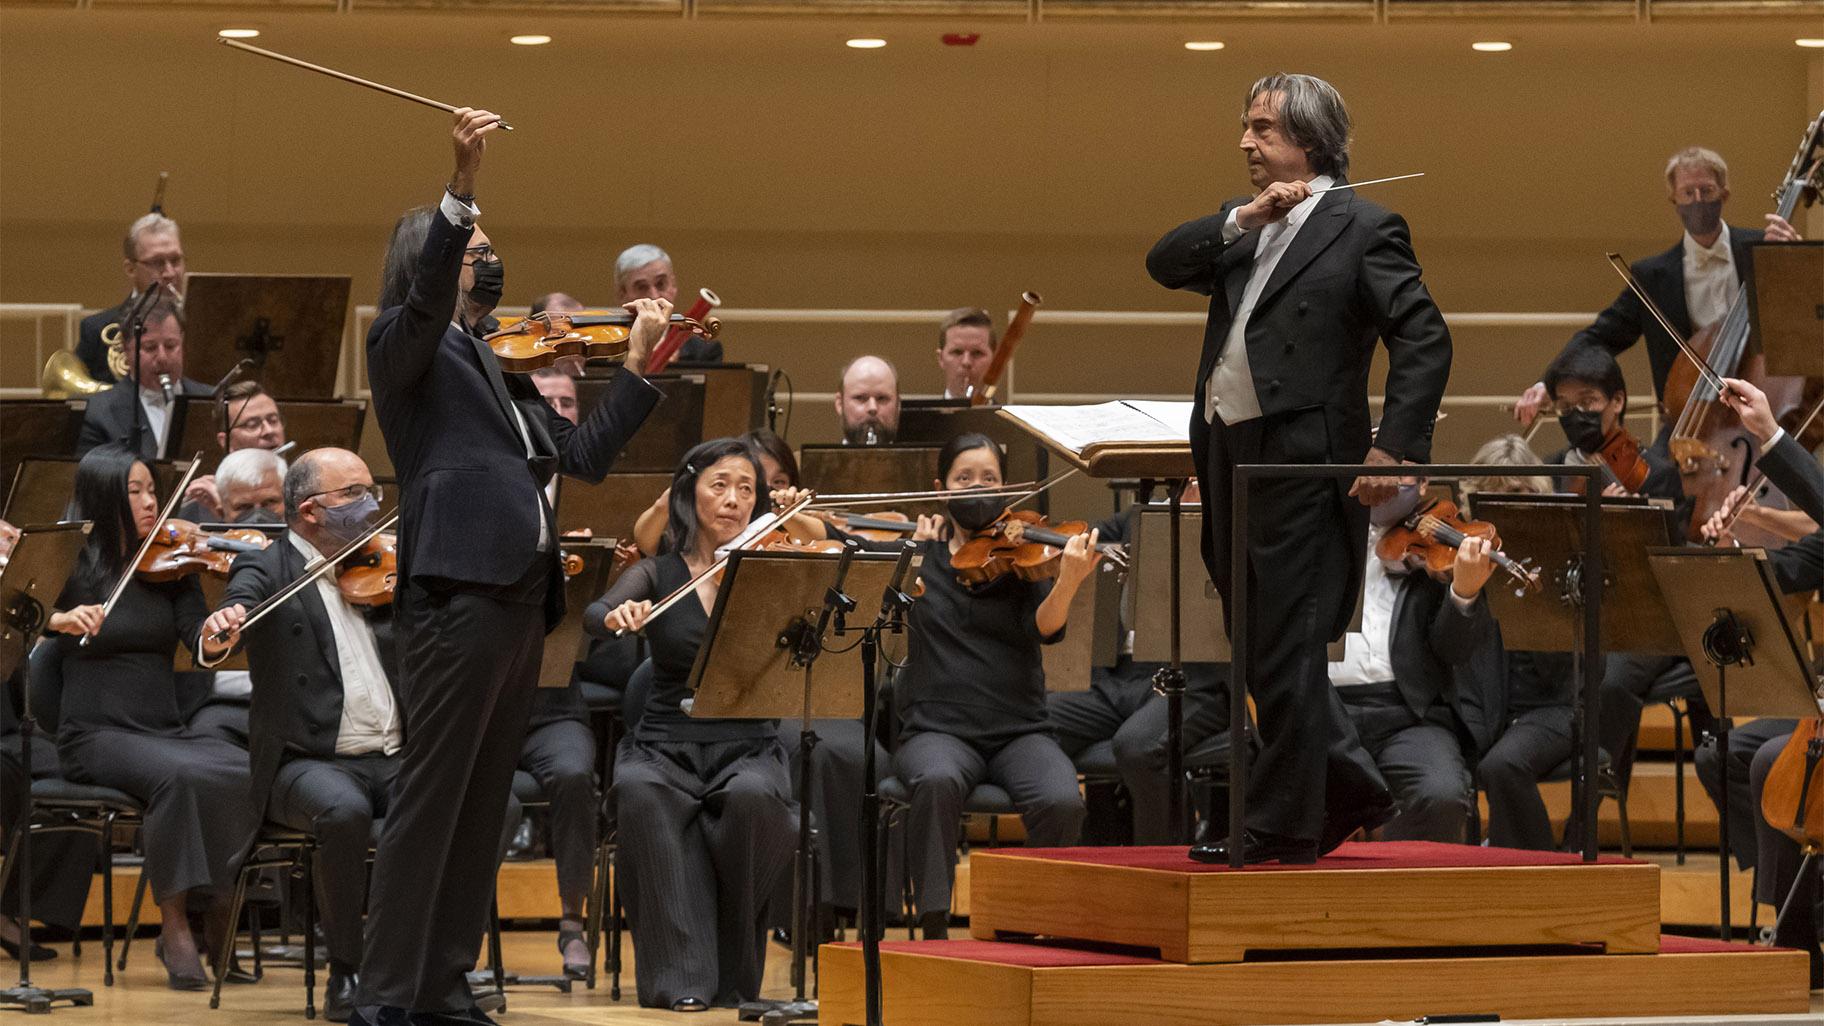 Riccardo Muti leads the CSO and violinist Leonidas Kavakos in performance of the Brahms Violin Concerto, September 30, 2021. (Credit Todd Rosenberg Photography)